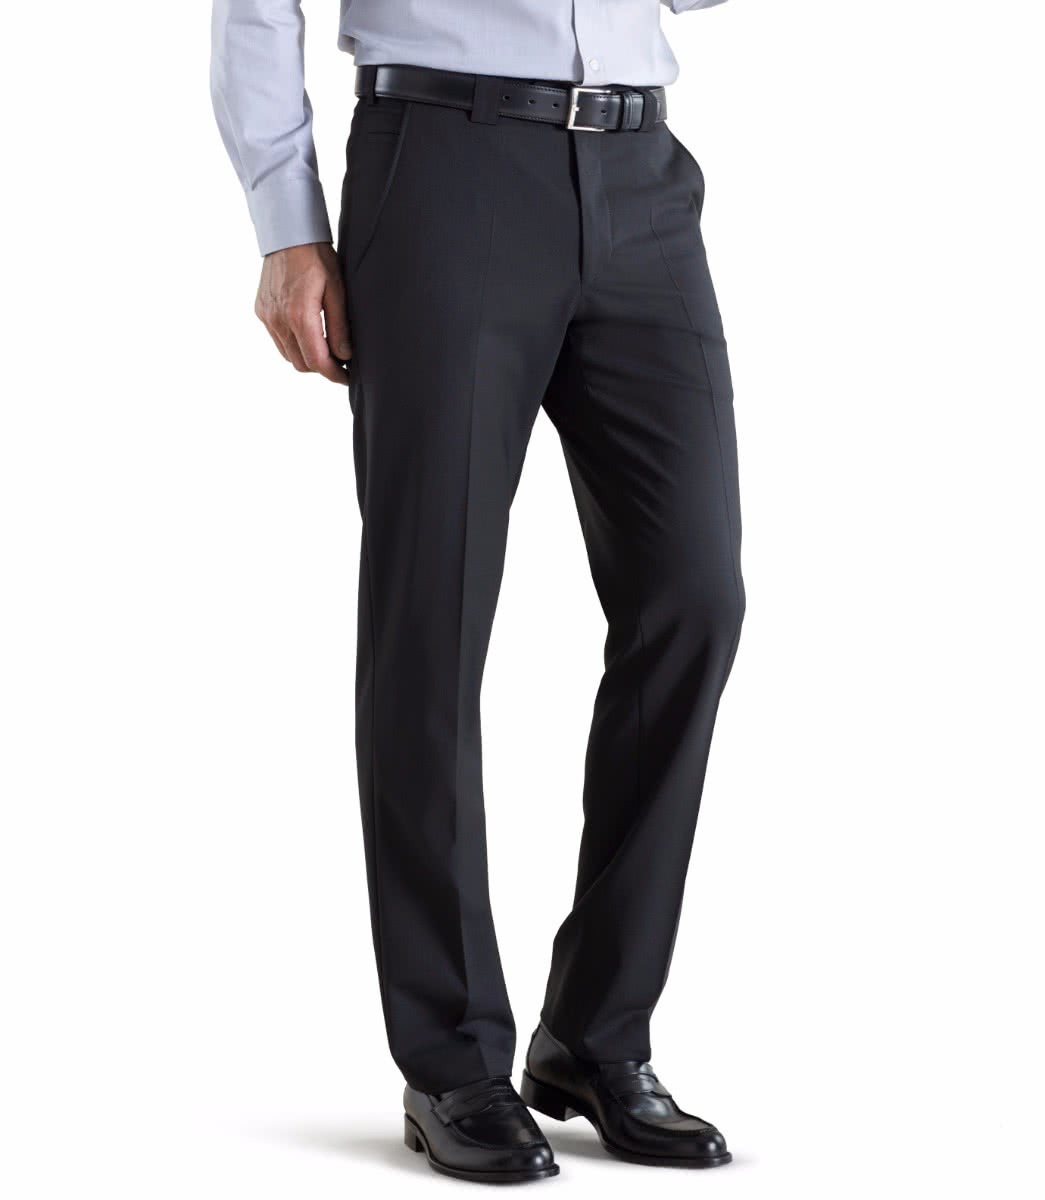 Meyer - Trousers, Roma style, Black